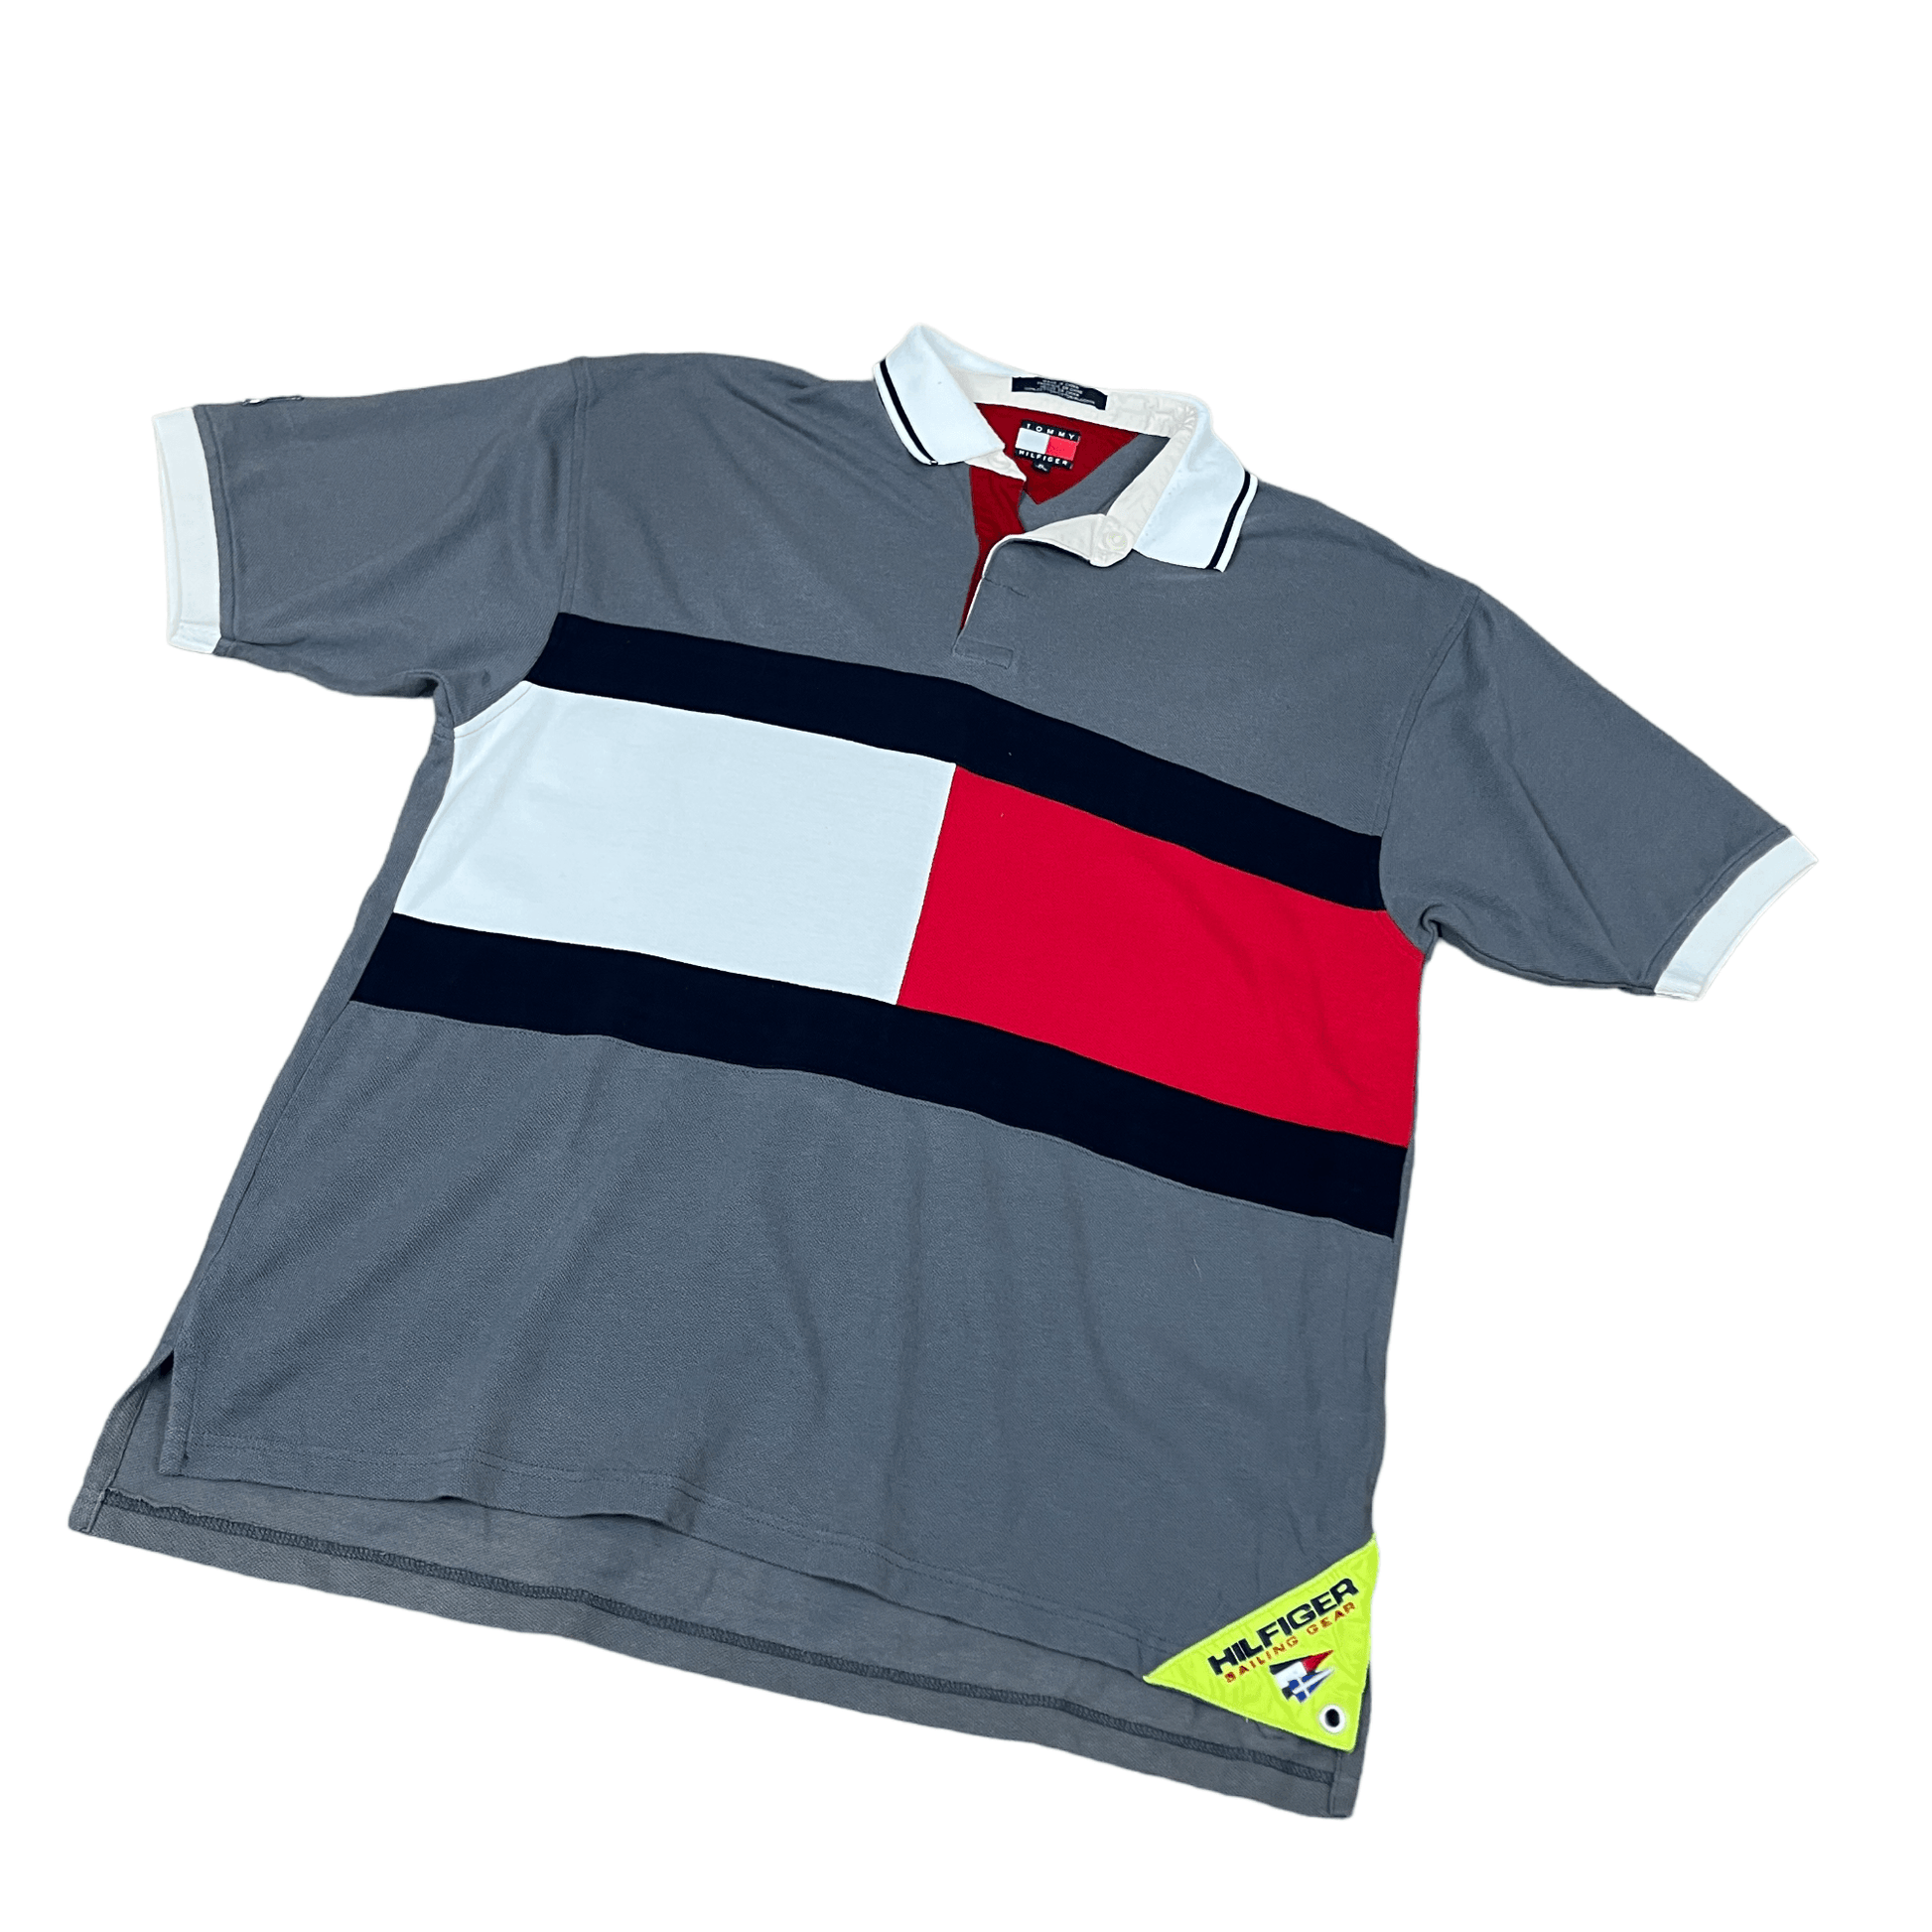 Vintage Grey Tommy Hilfiger Sailing Gear Polo Shirt - Extra Large - The Streetwear Studio